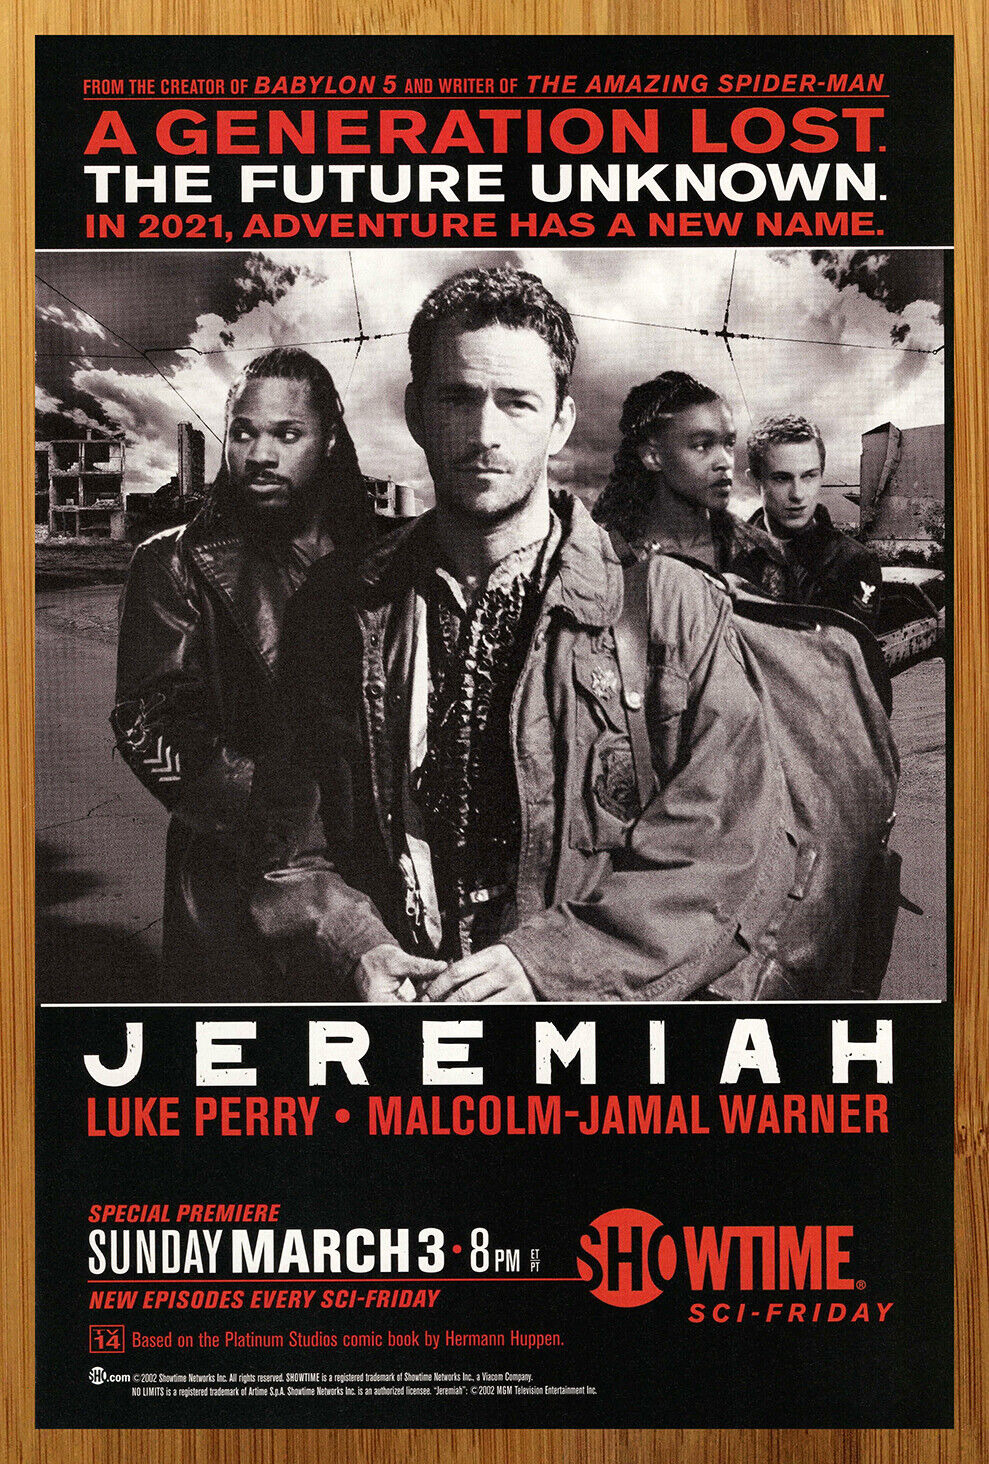 Extra Large TV Poster Image for Jeremiah 